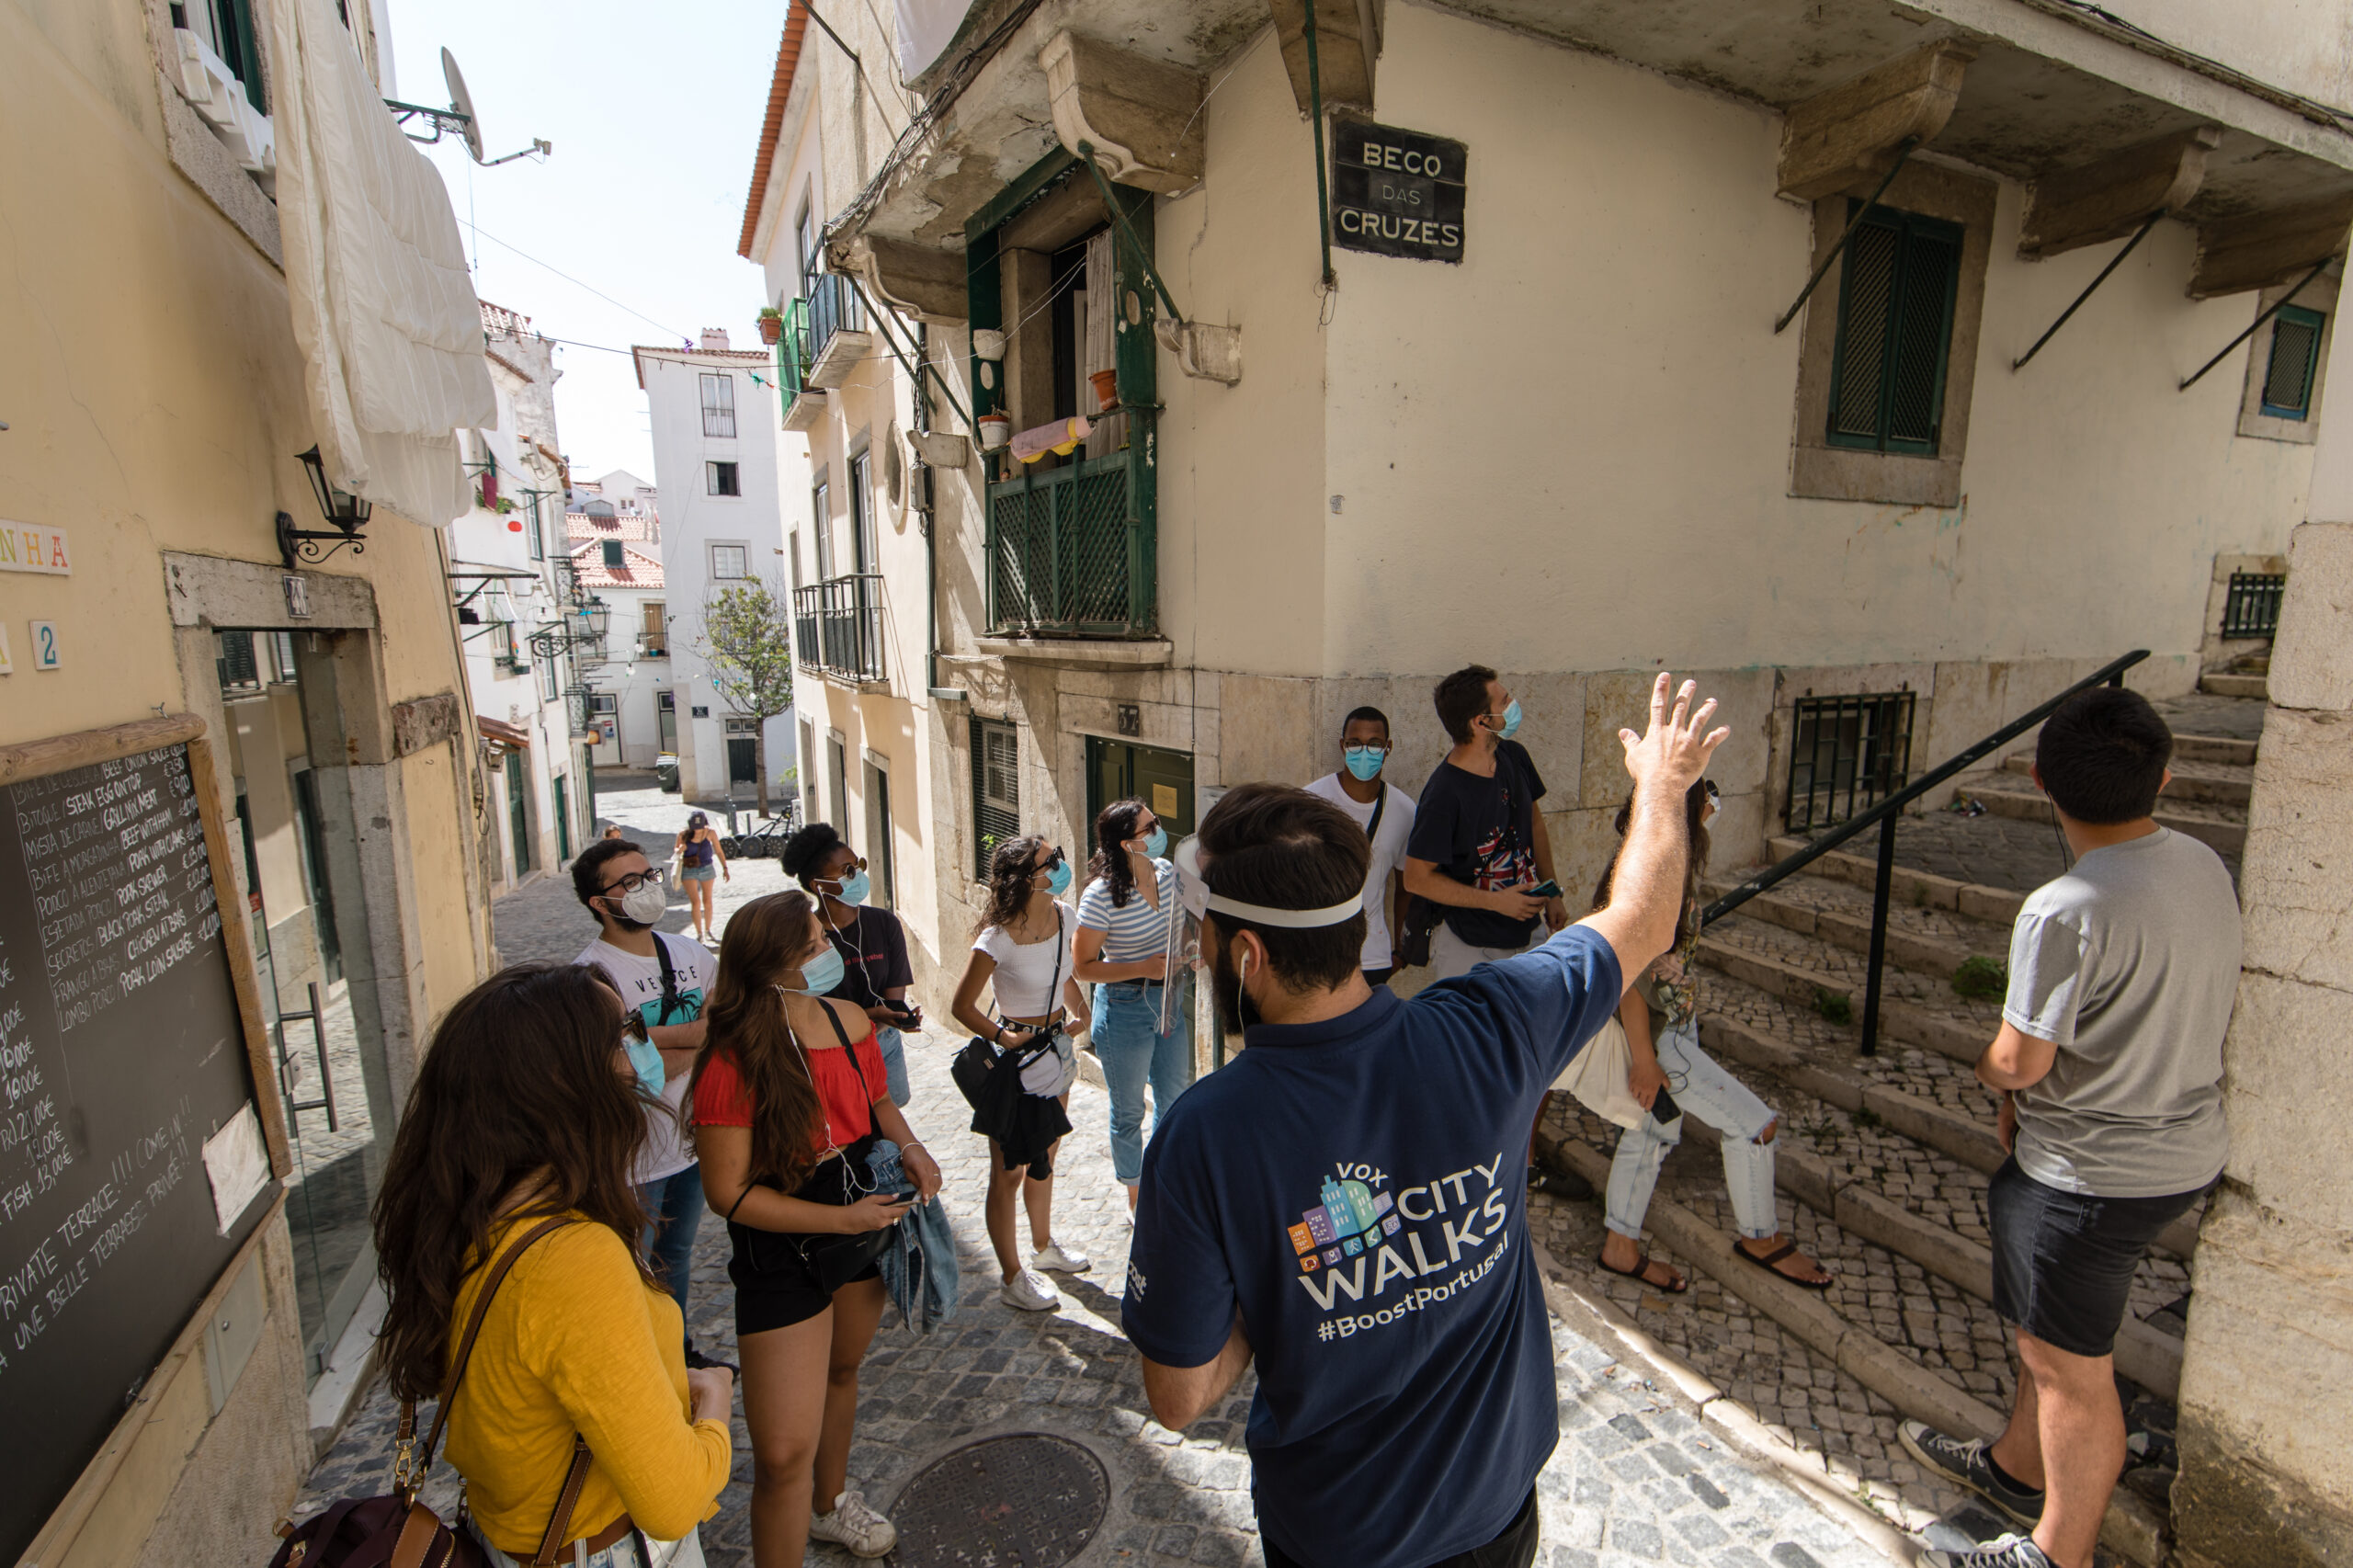 A Walking tour in Lisbon designed for you